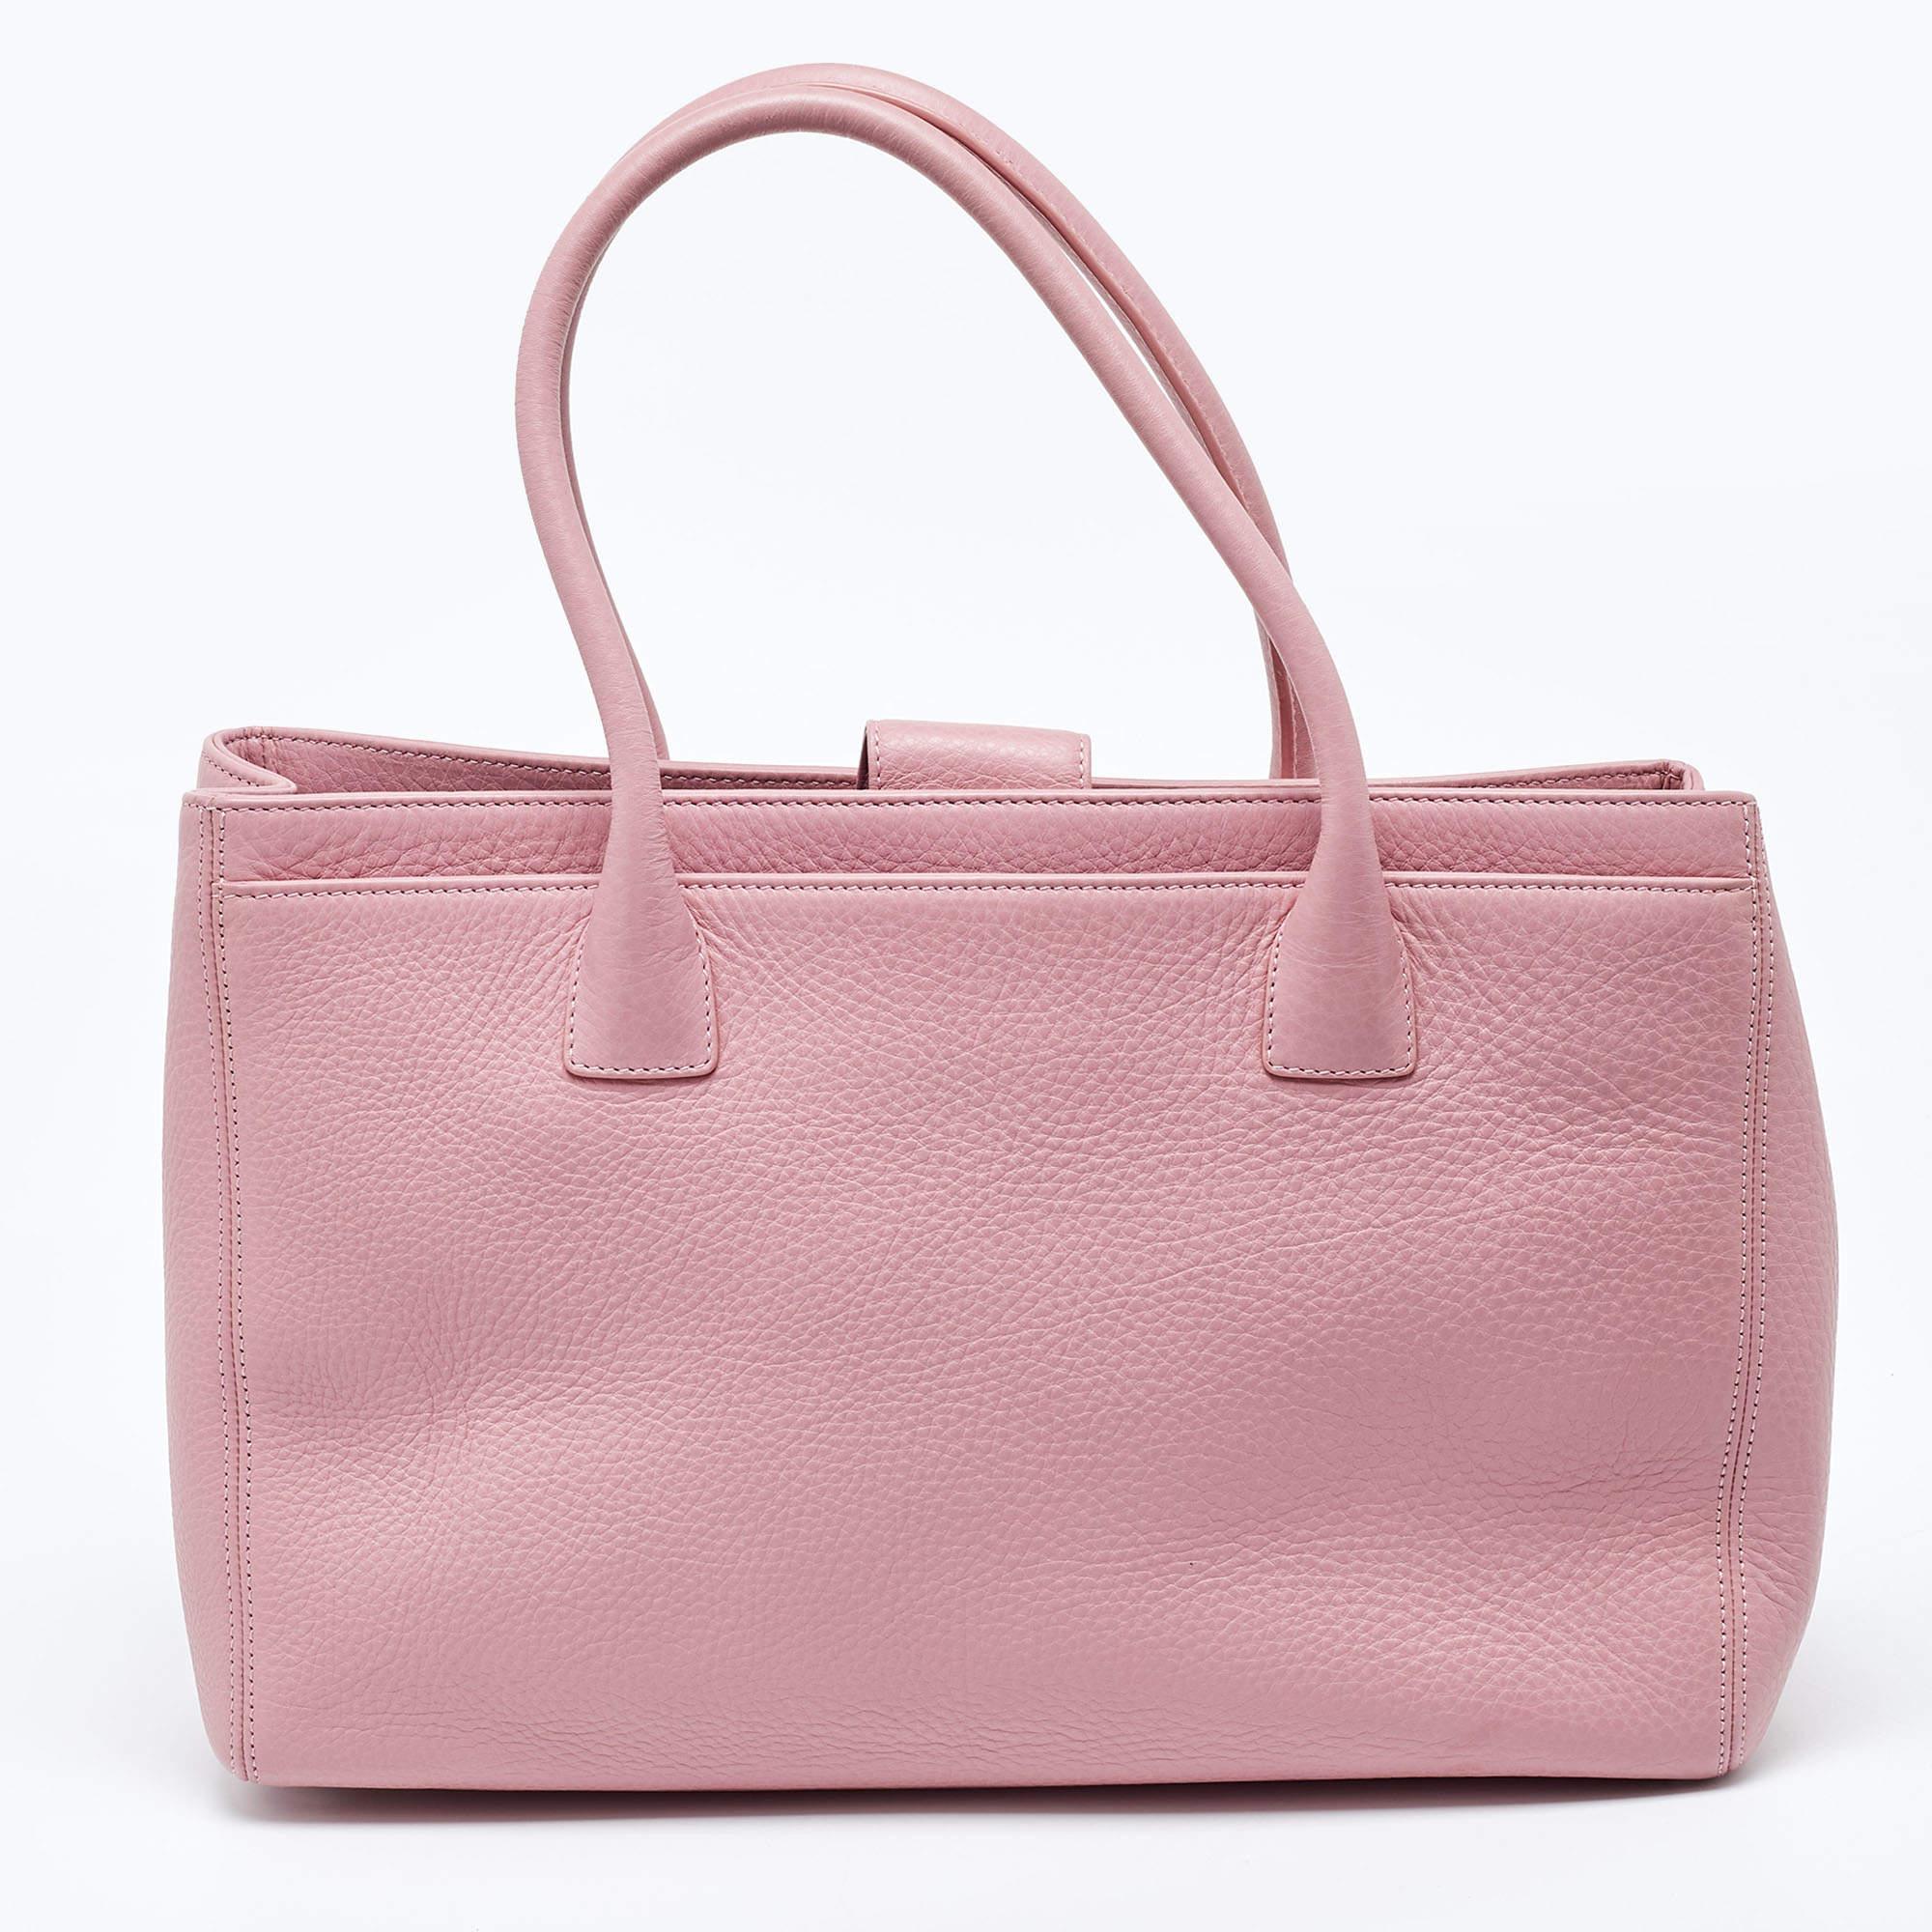 Chanel Pink Leather Executive Cerf Tote For Sale 4